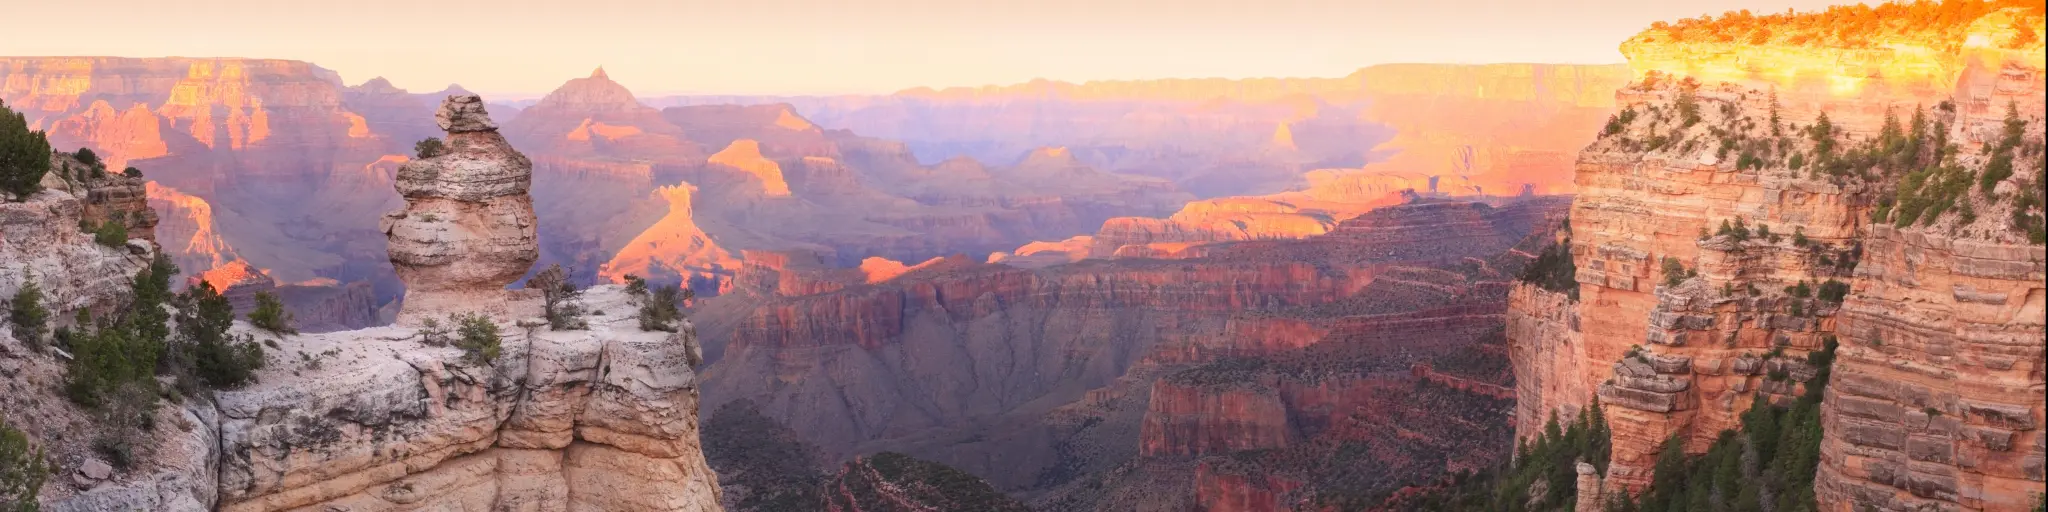 Panorama of the Grand Canyon with Sunset Colors Reflecting in the Rocks